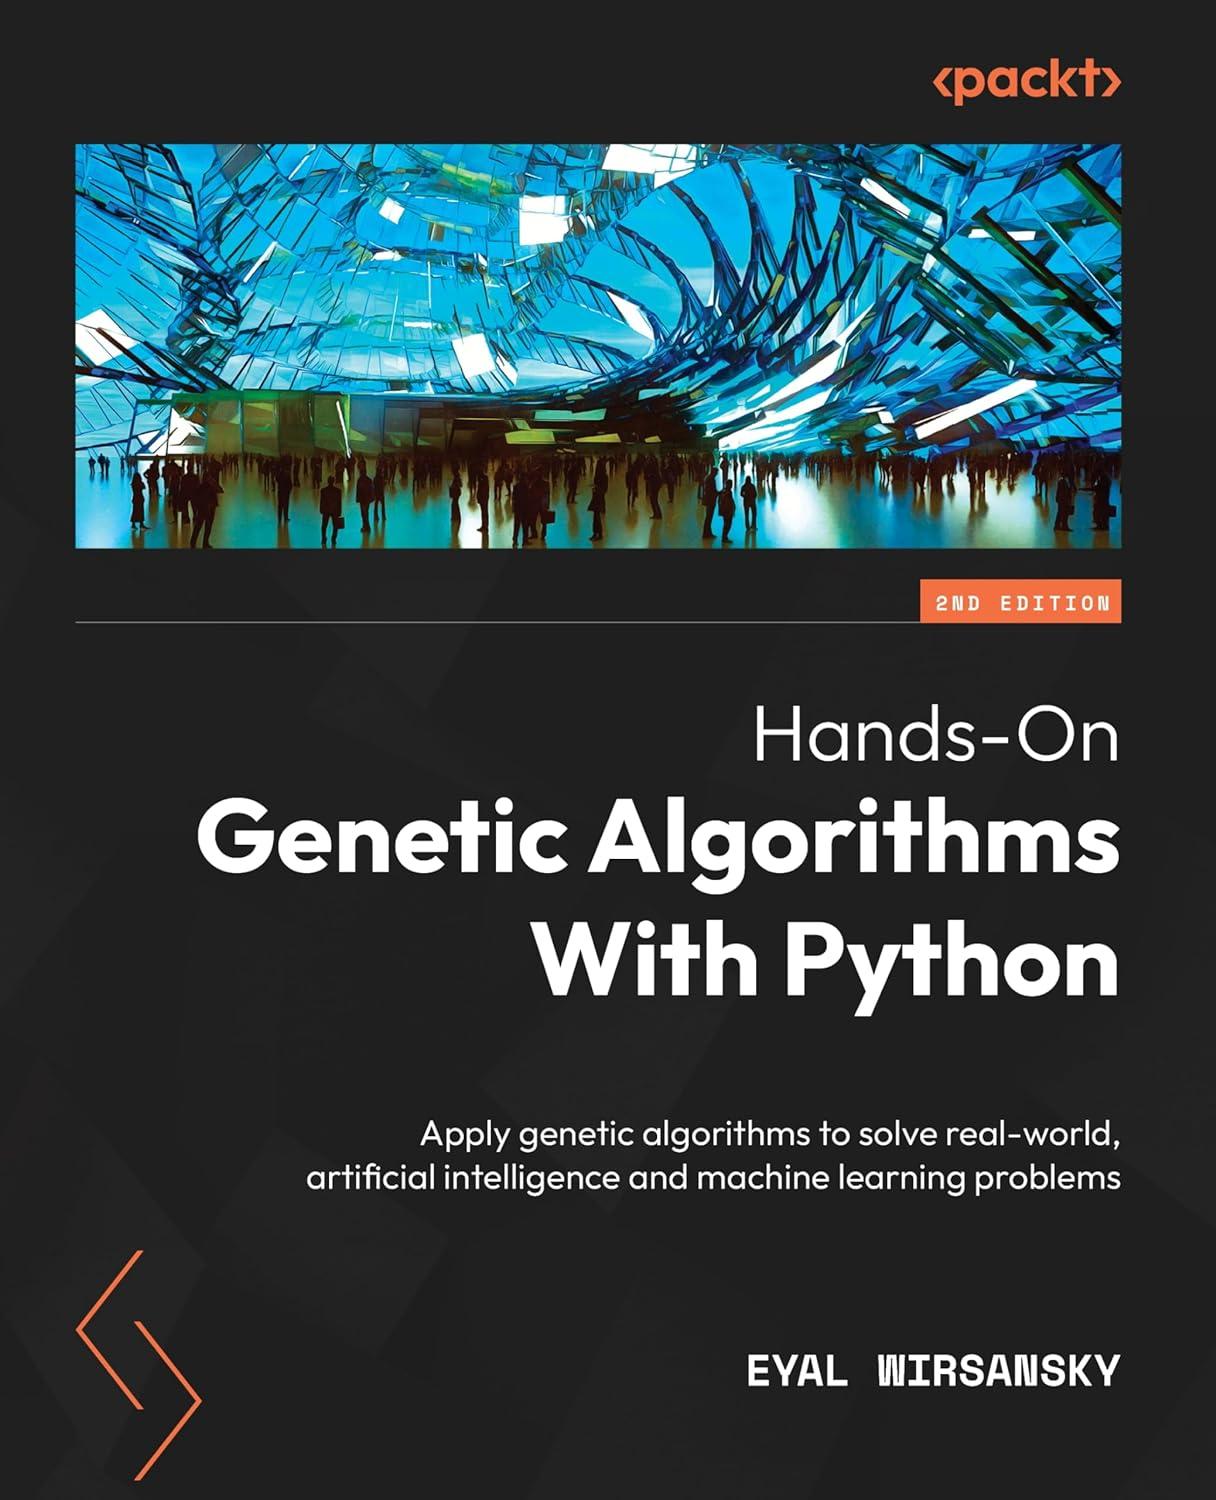 hands-on genetic algorithms with python apply genetic algorithms to solve real-world artificial intelligence